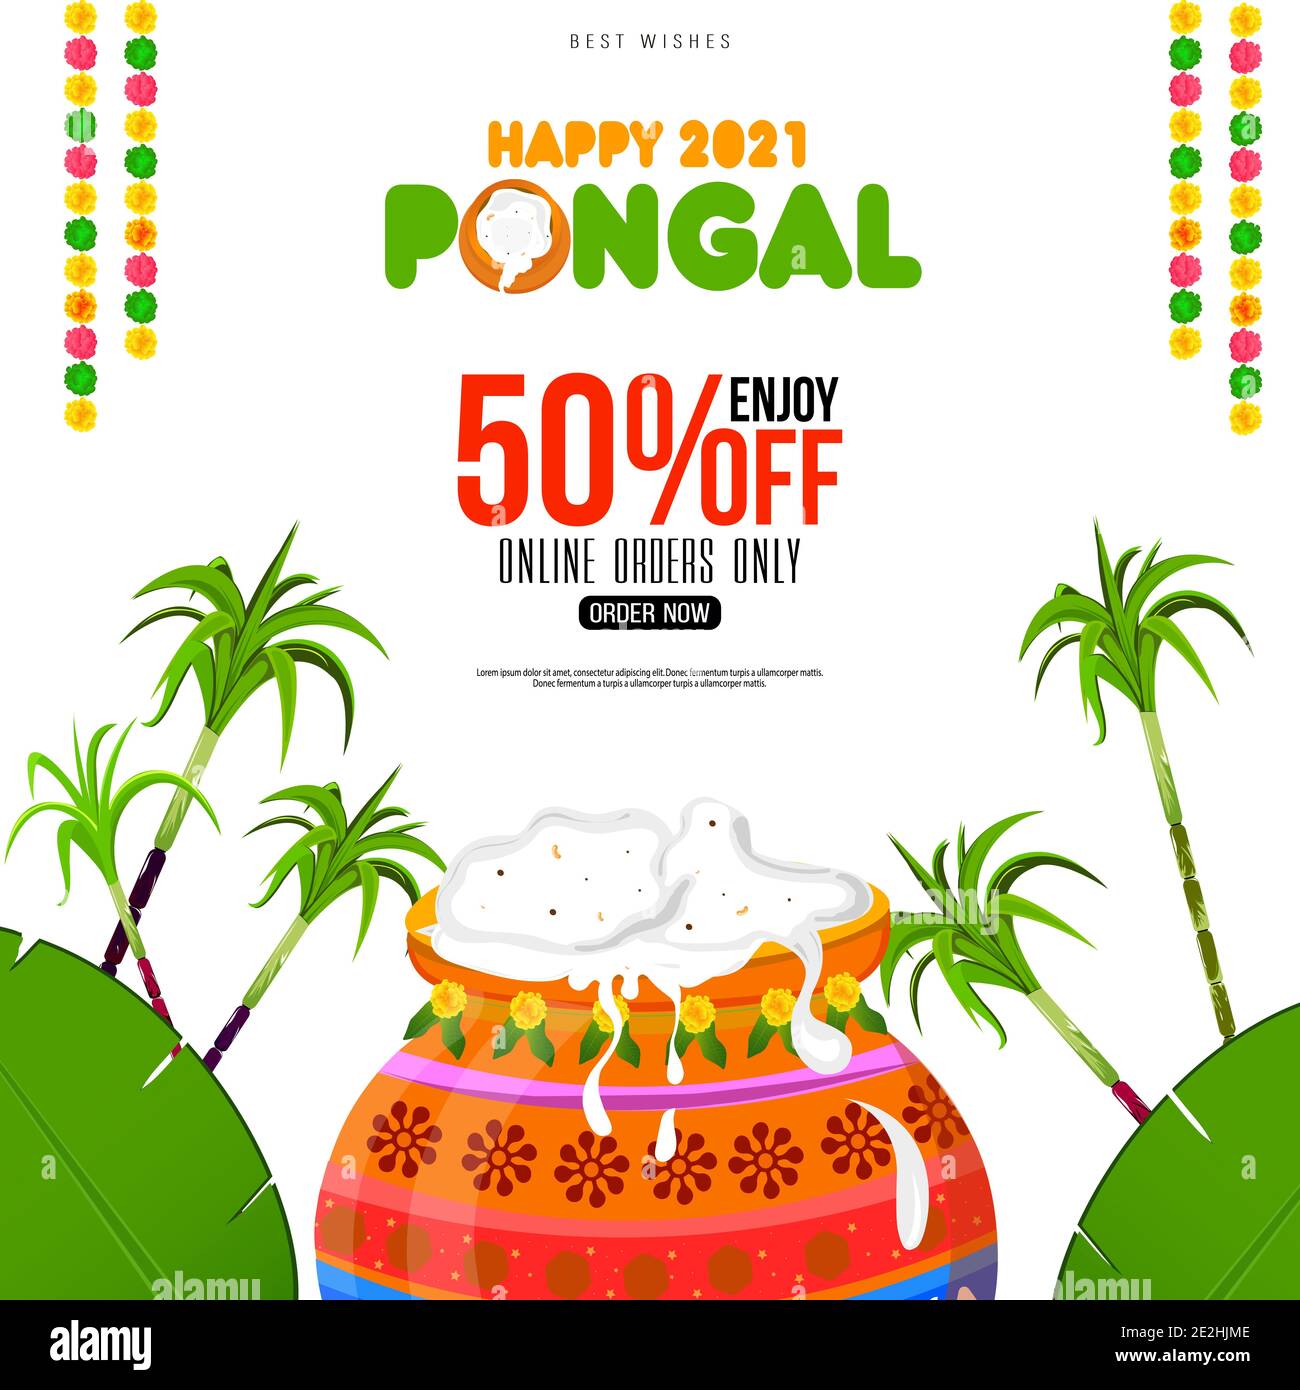 Pongal Festival Offer Banner Design with 50% Discount Offers Stock Vector